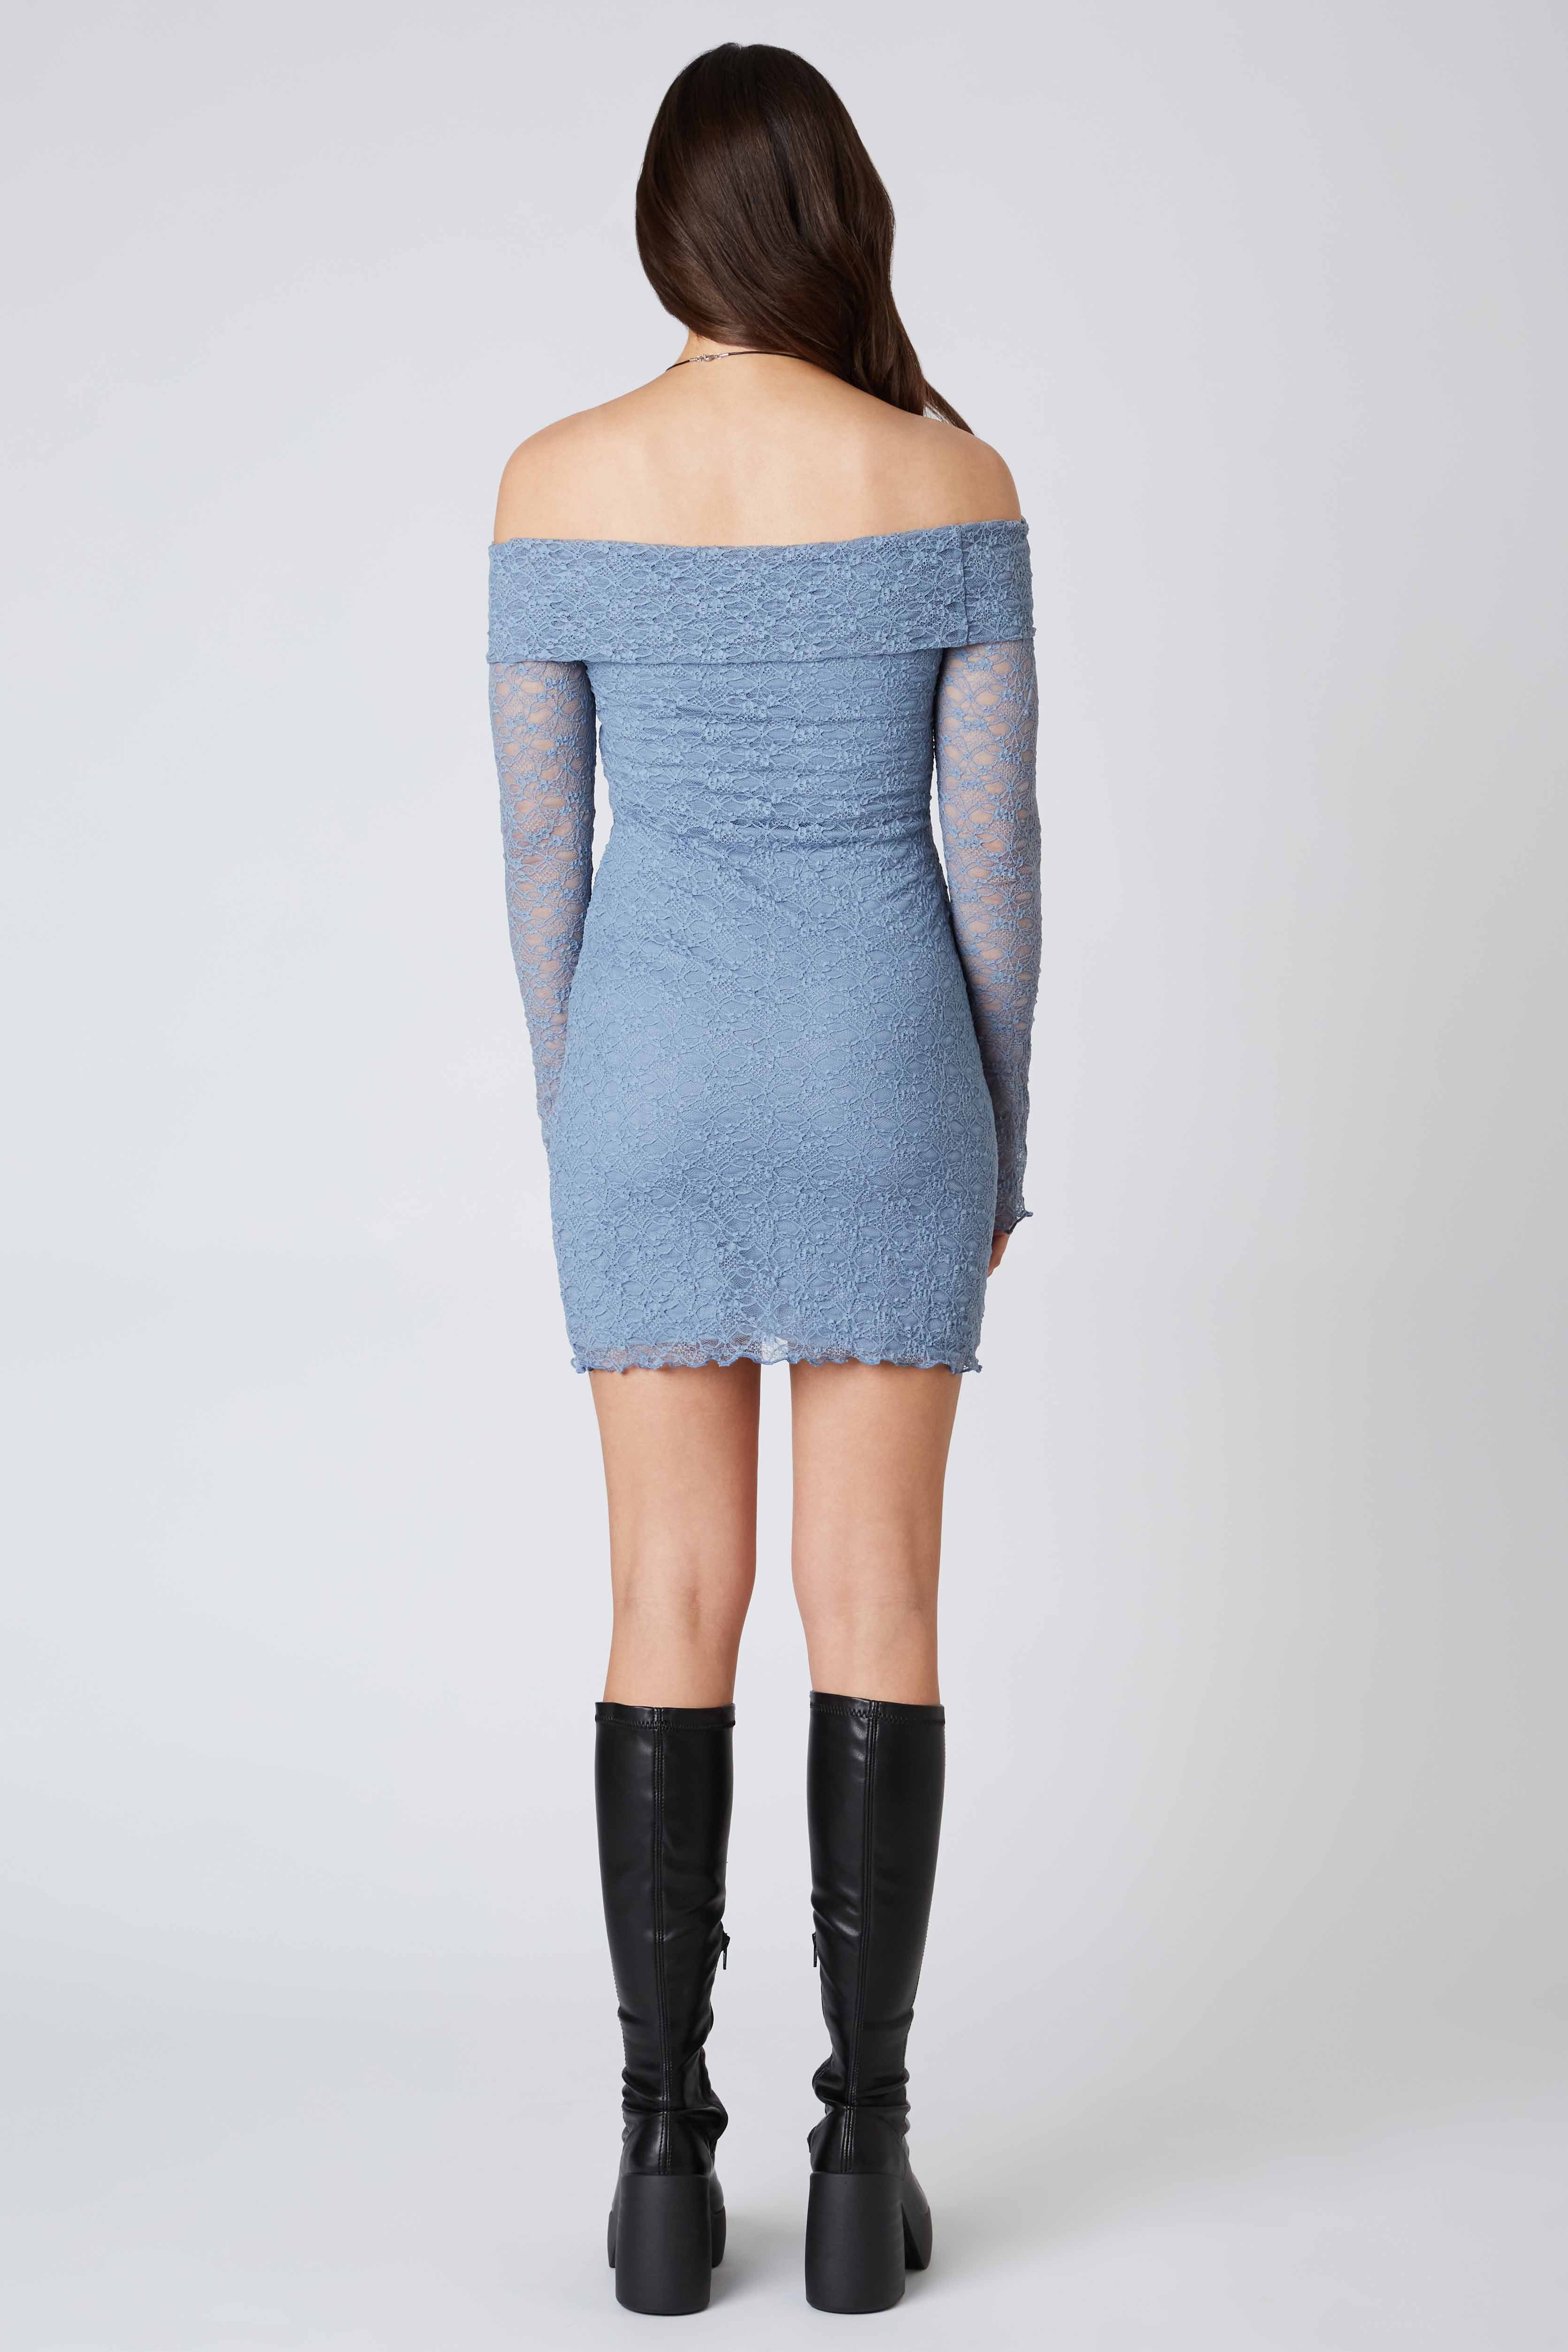 Off the Shoulder Lace Mini Dress in Slate Back View